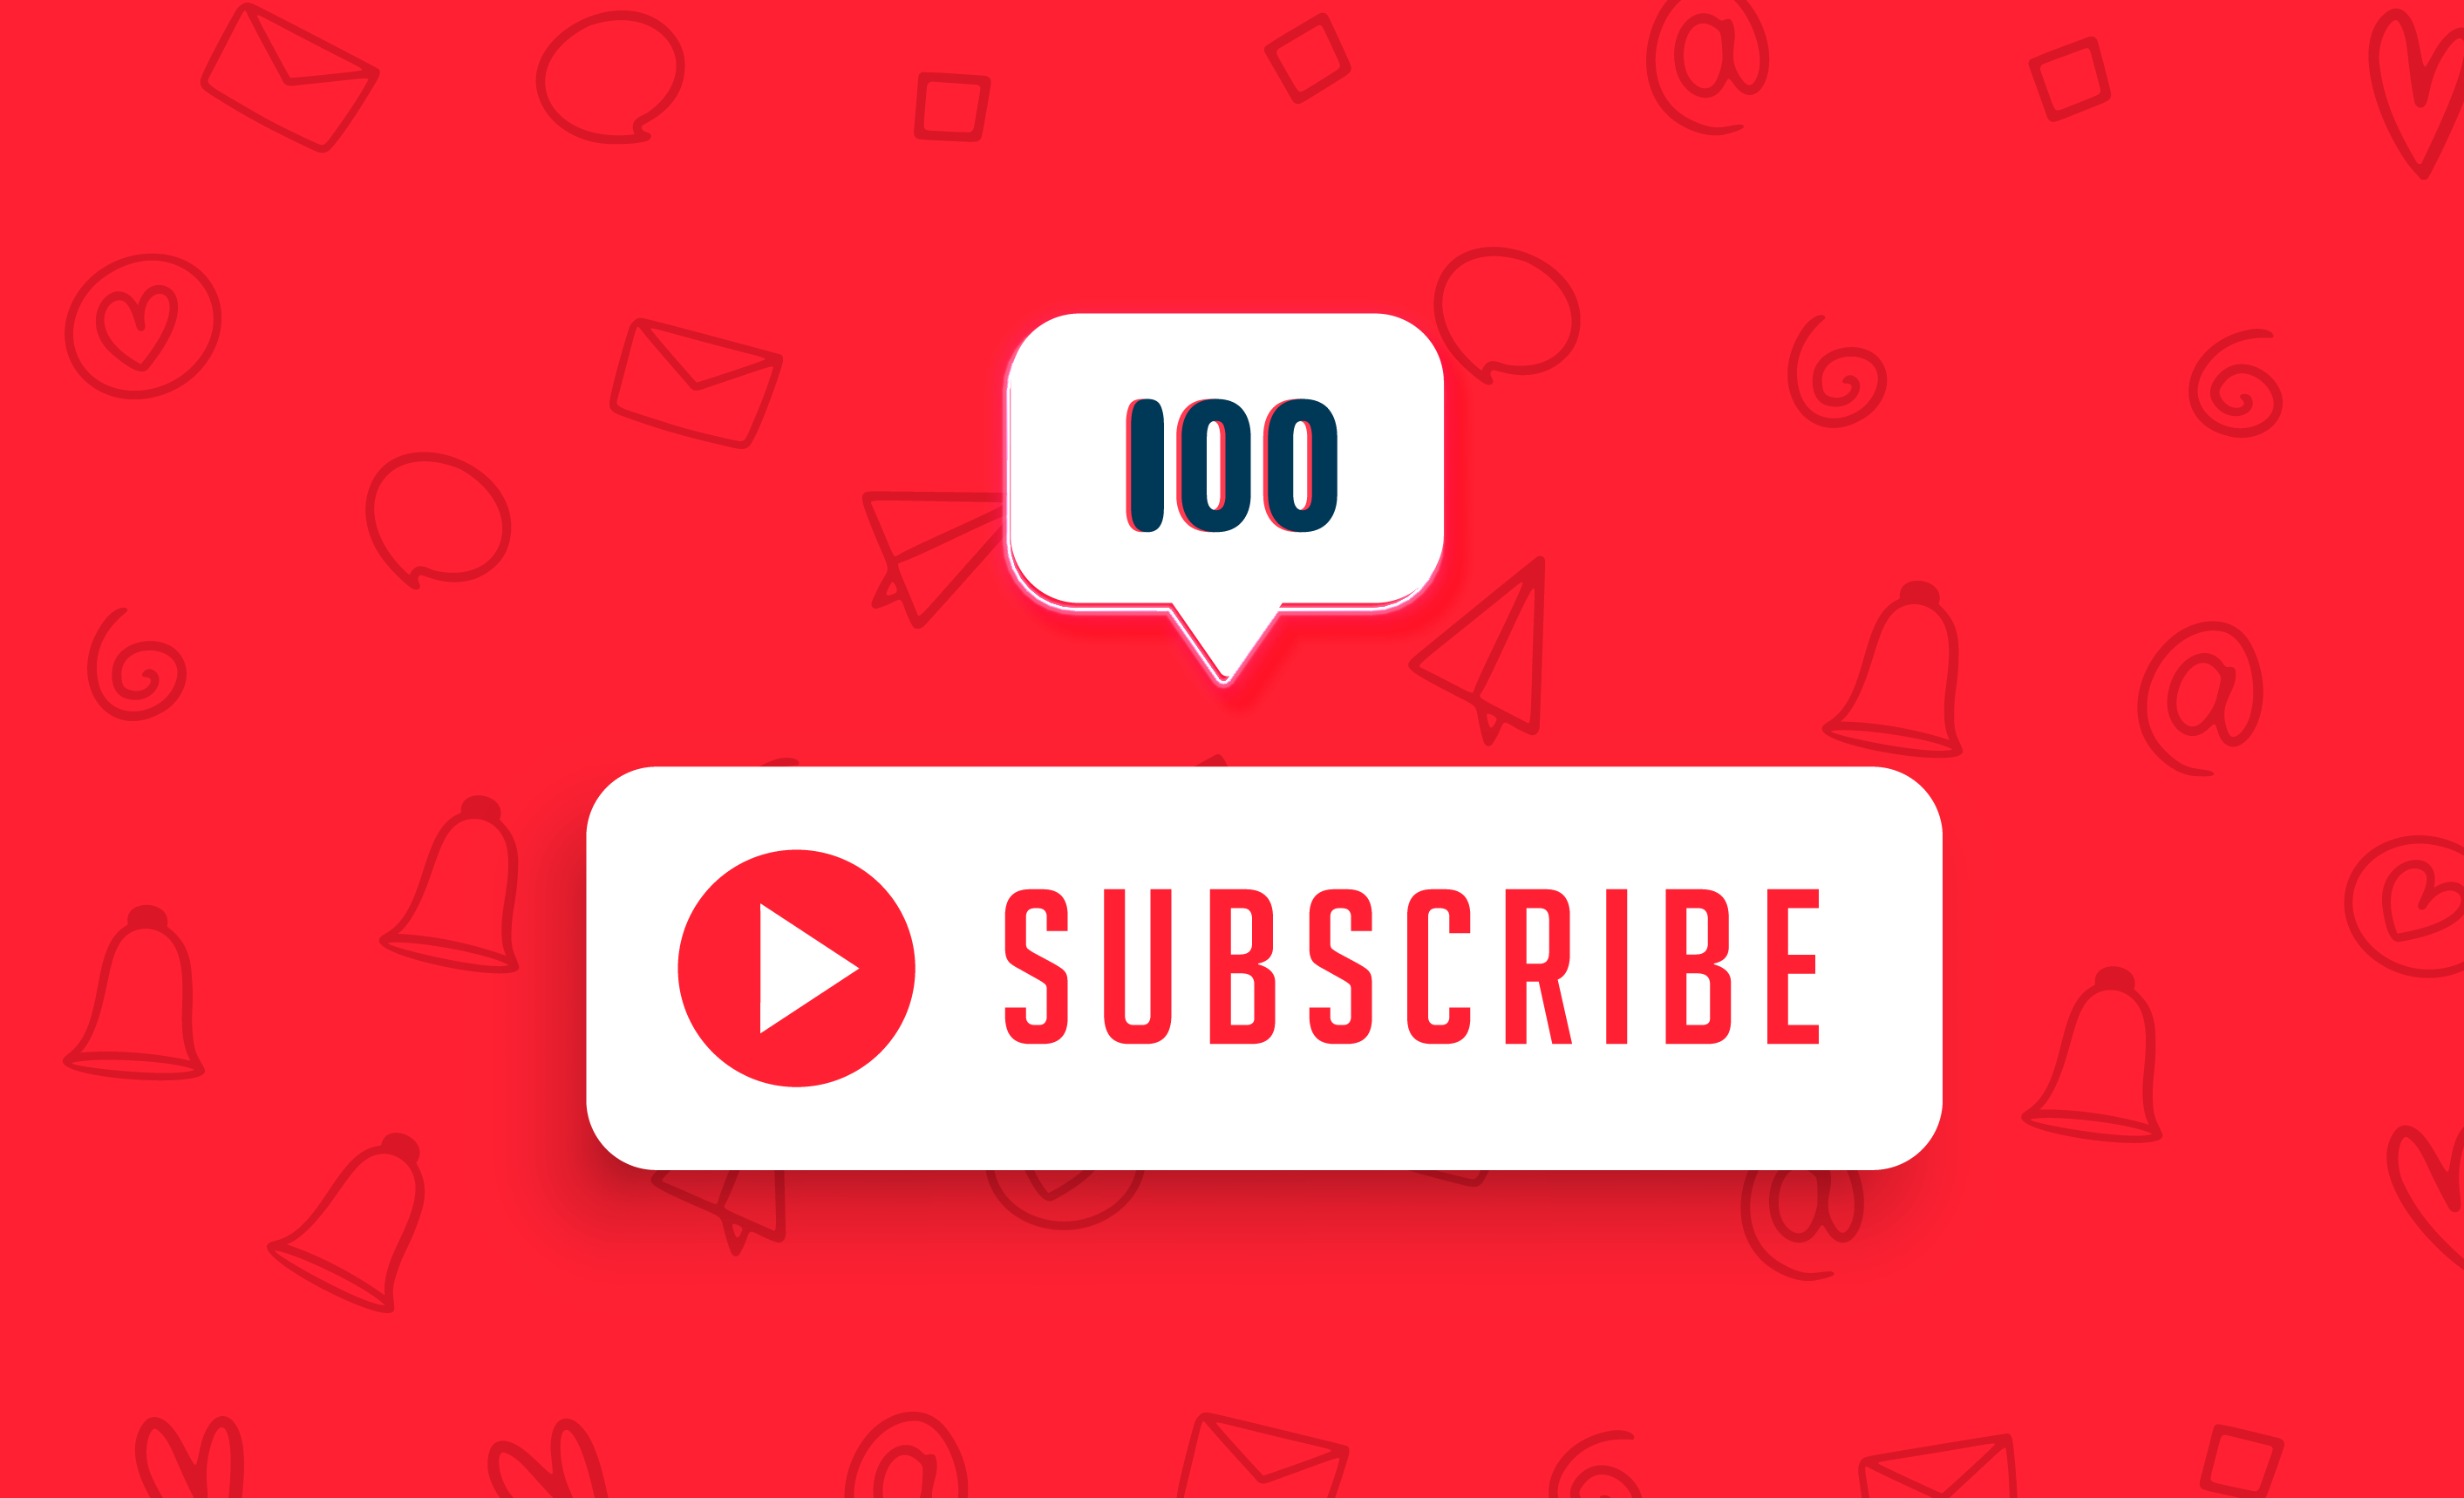 How to Get Your First 100 Subscribers on YouTube